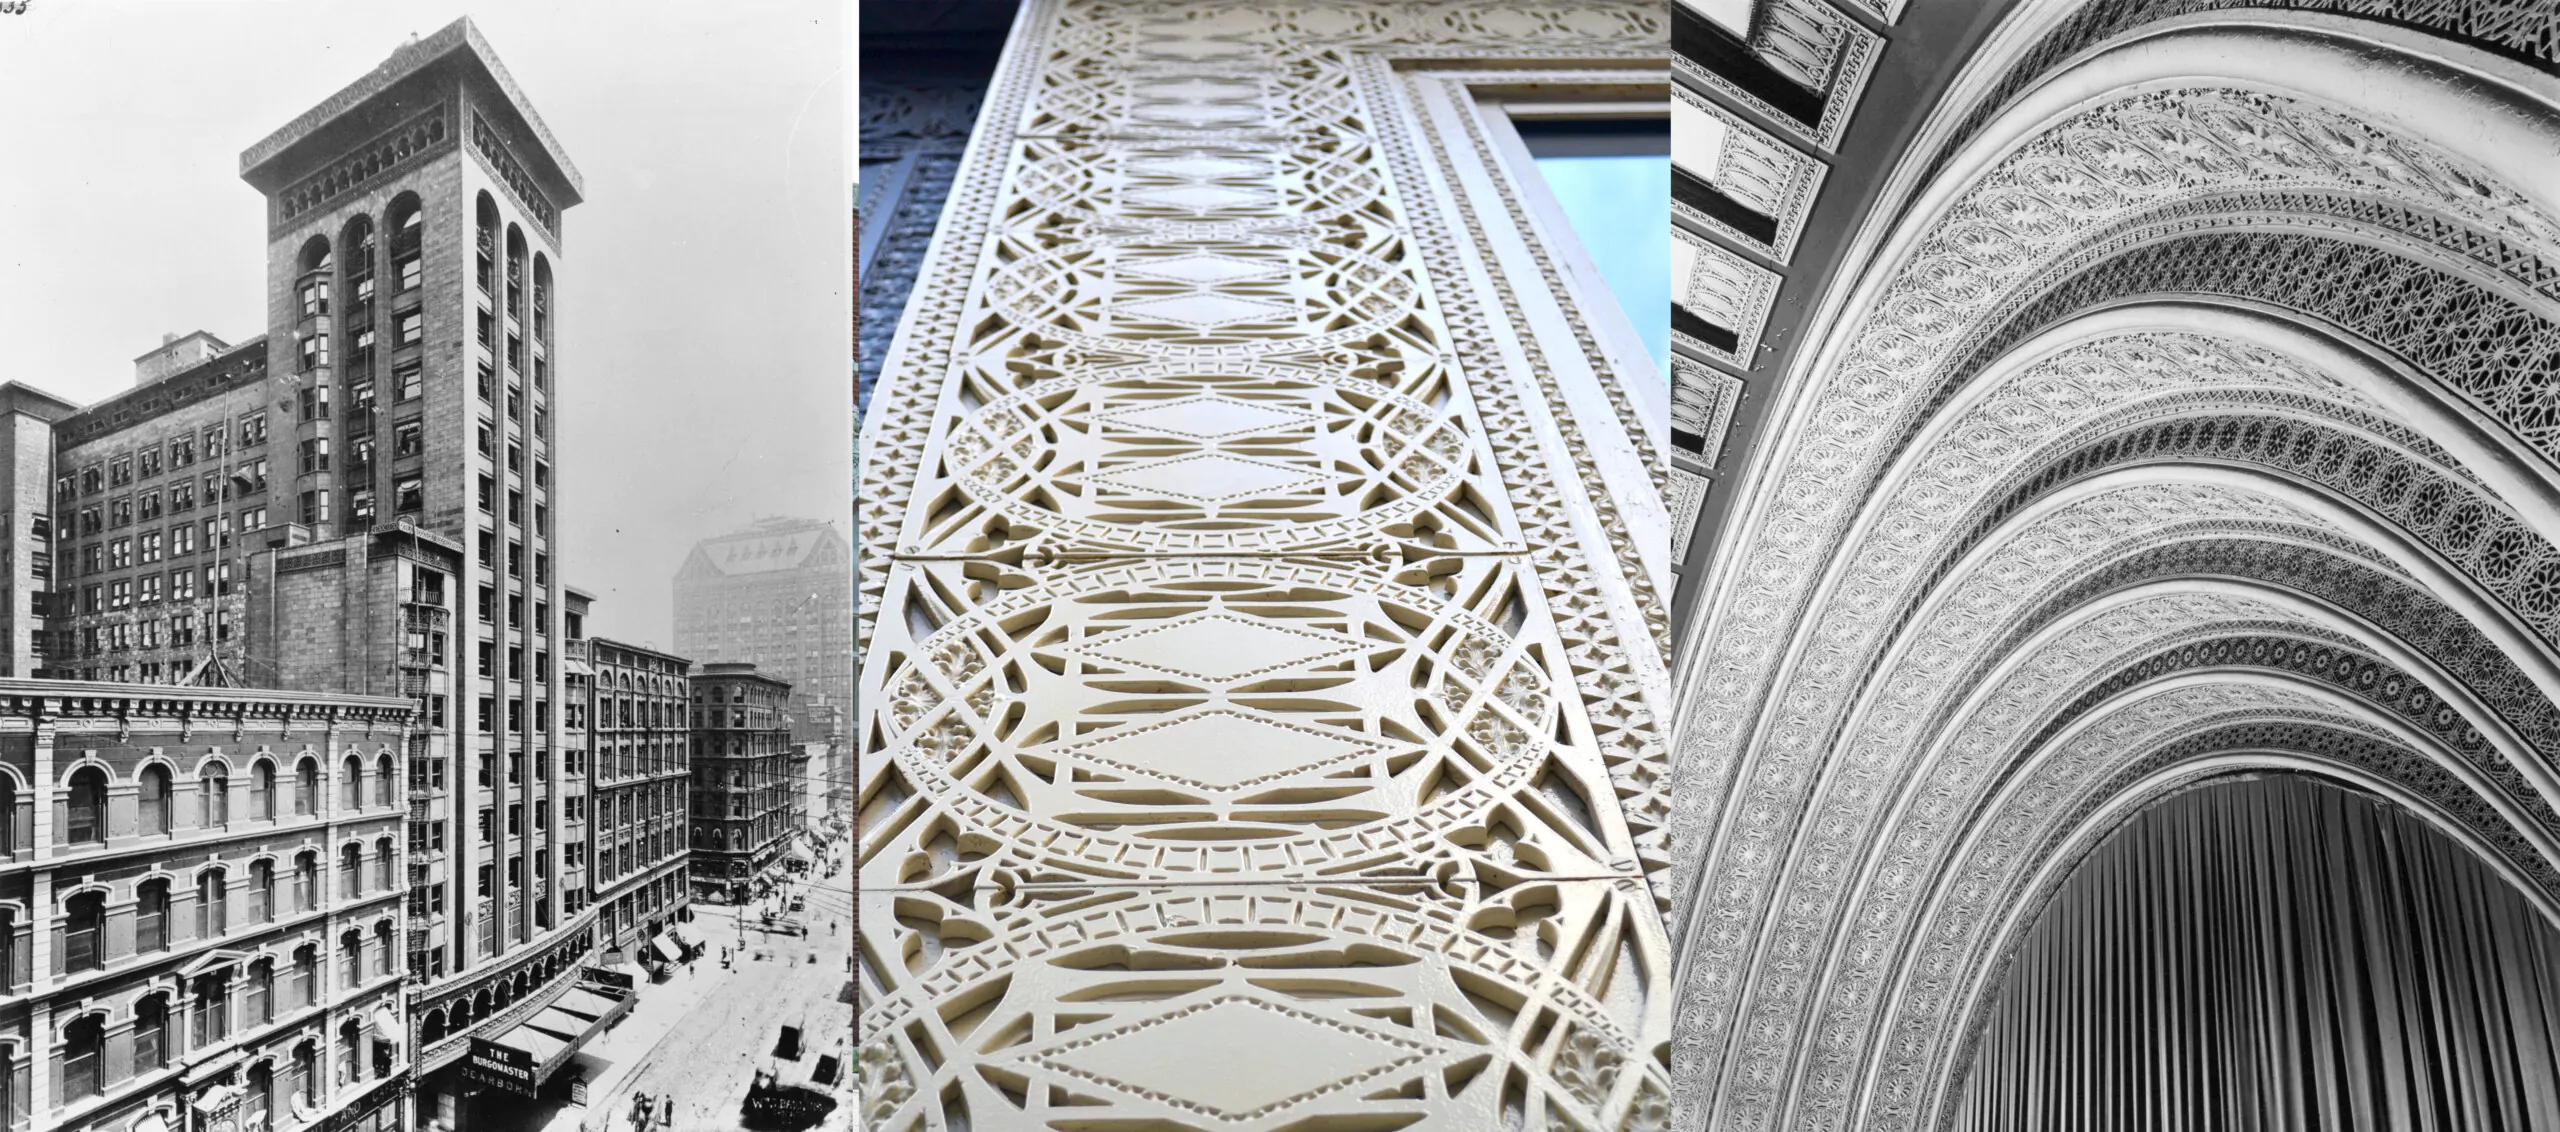 15 Projects by "Father of Skyscrapers" Louis Sullivan - Garrick Theatre (Schiller Theatre Building)